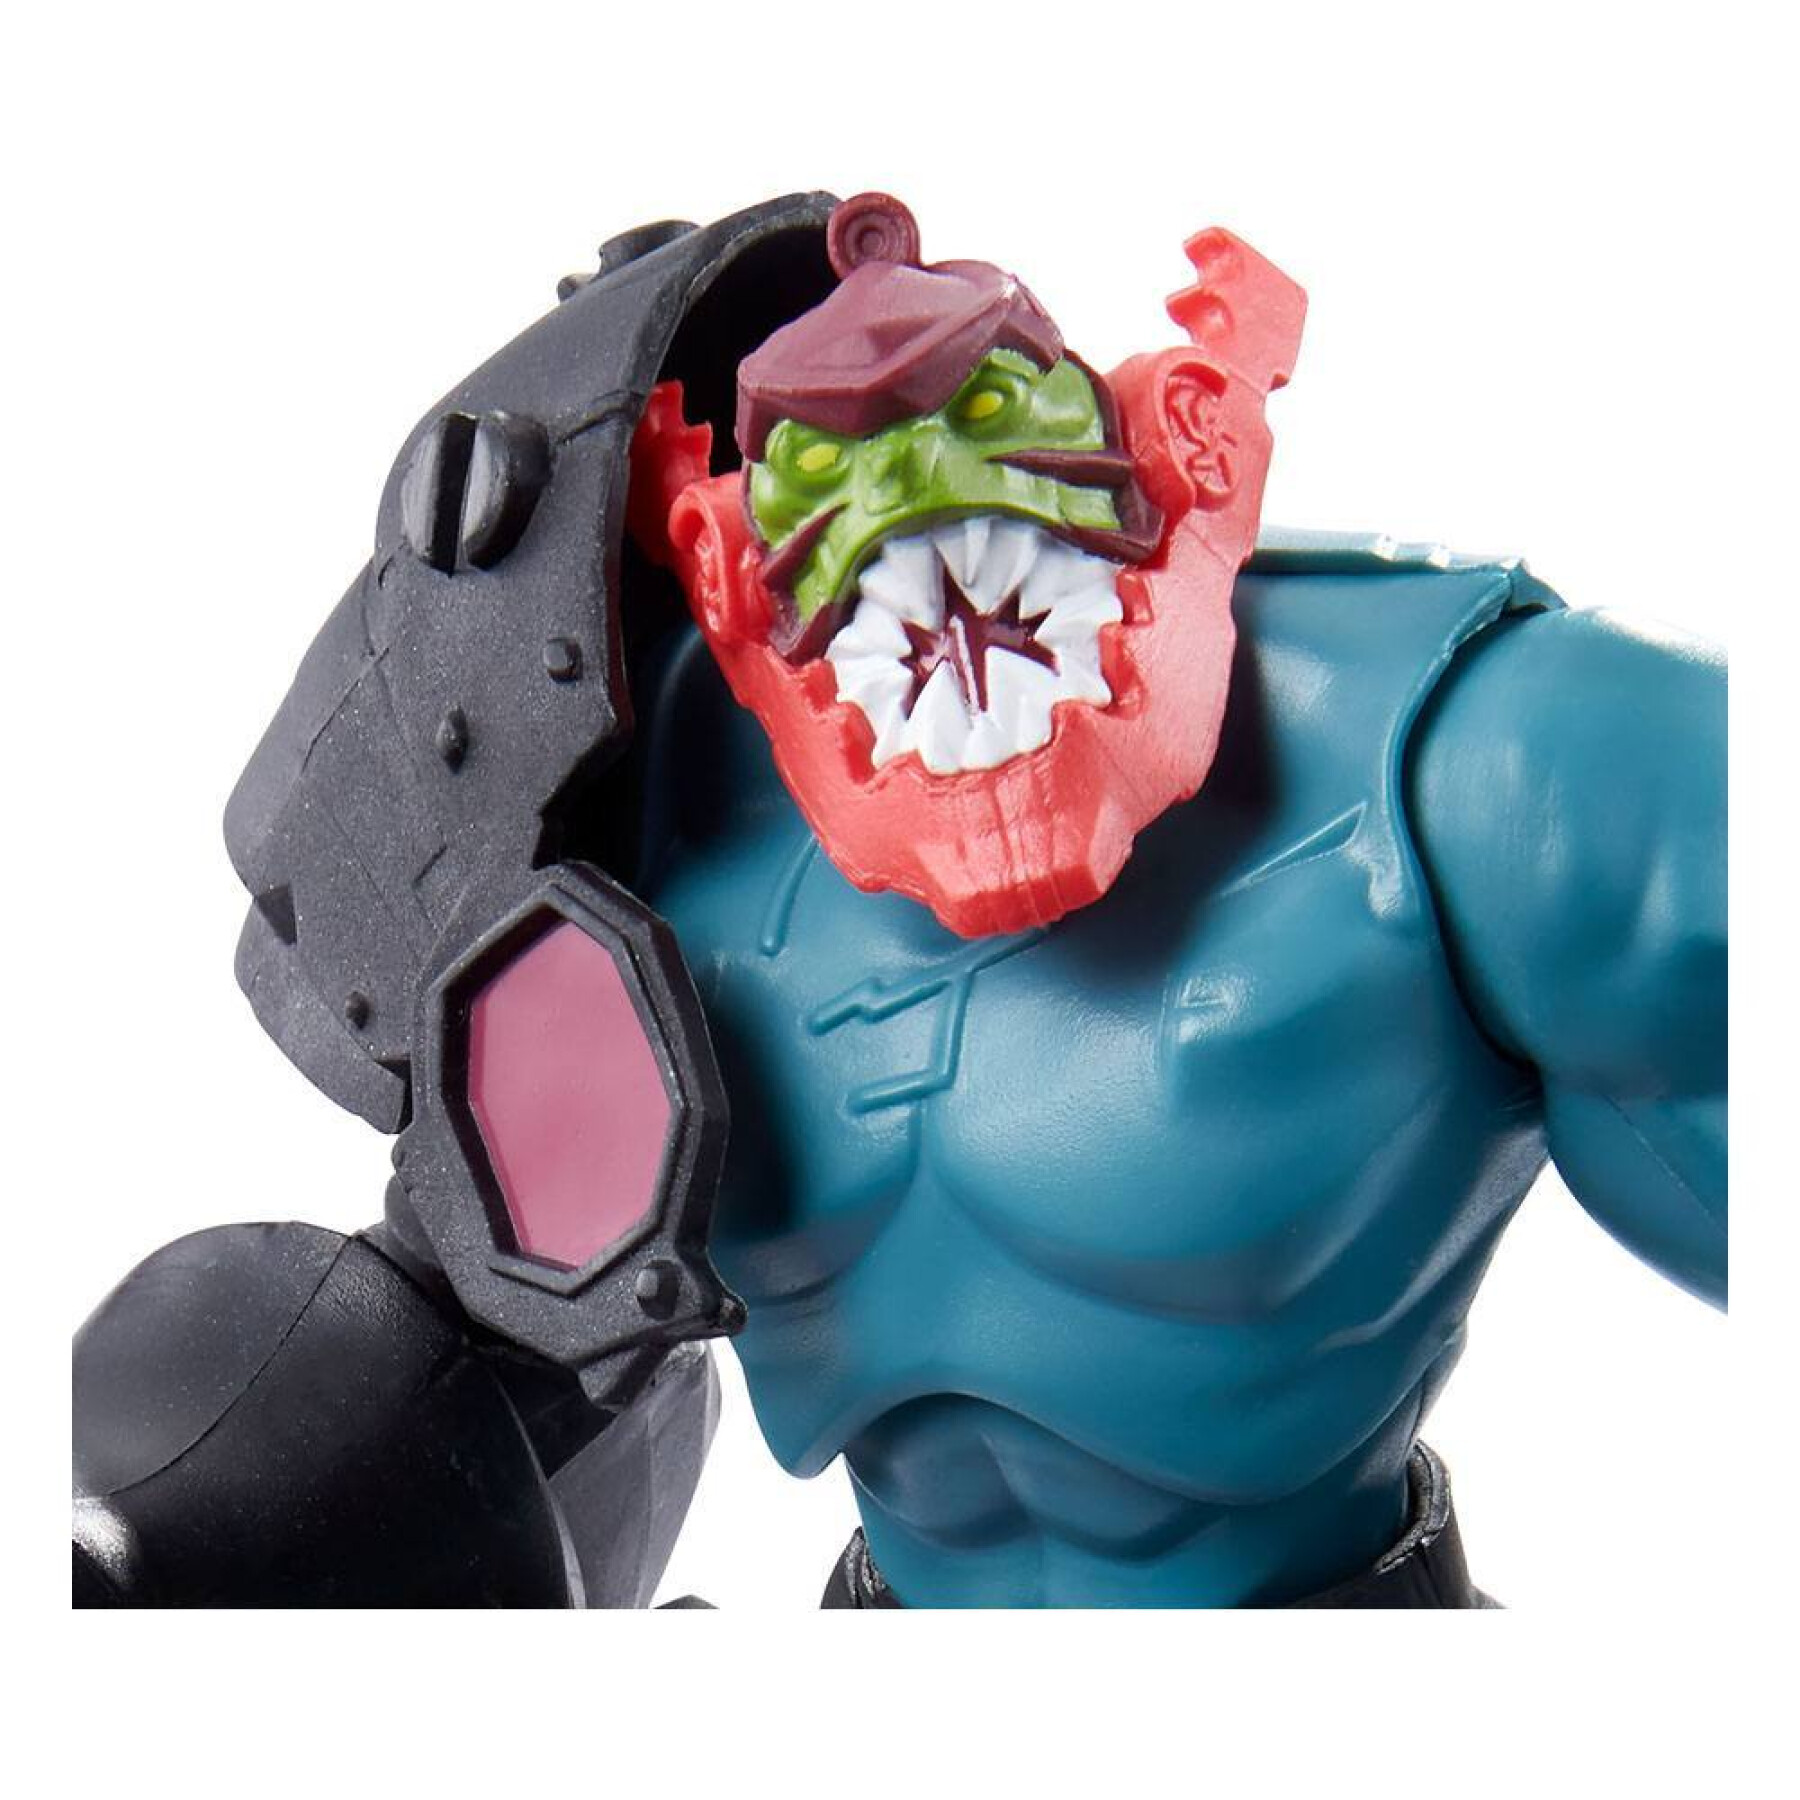 Figurine Mattel He-Man and the Masters of the Universe 2022 Trap Jaw